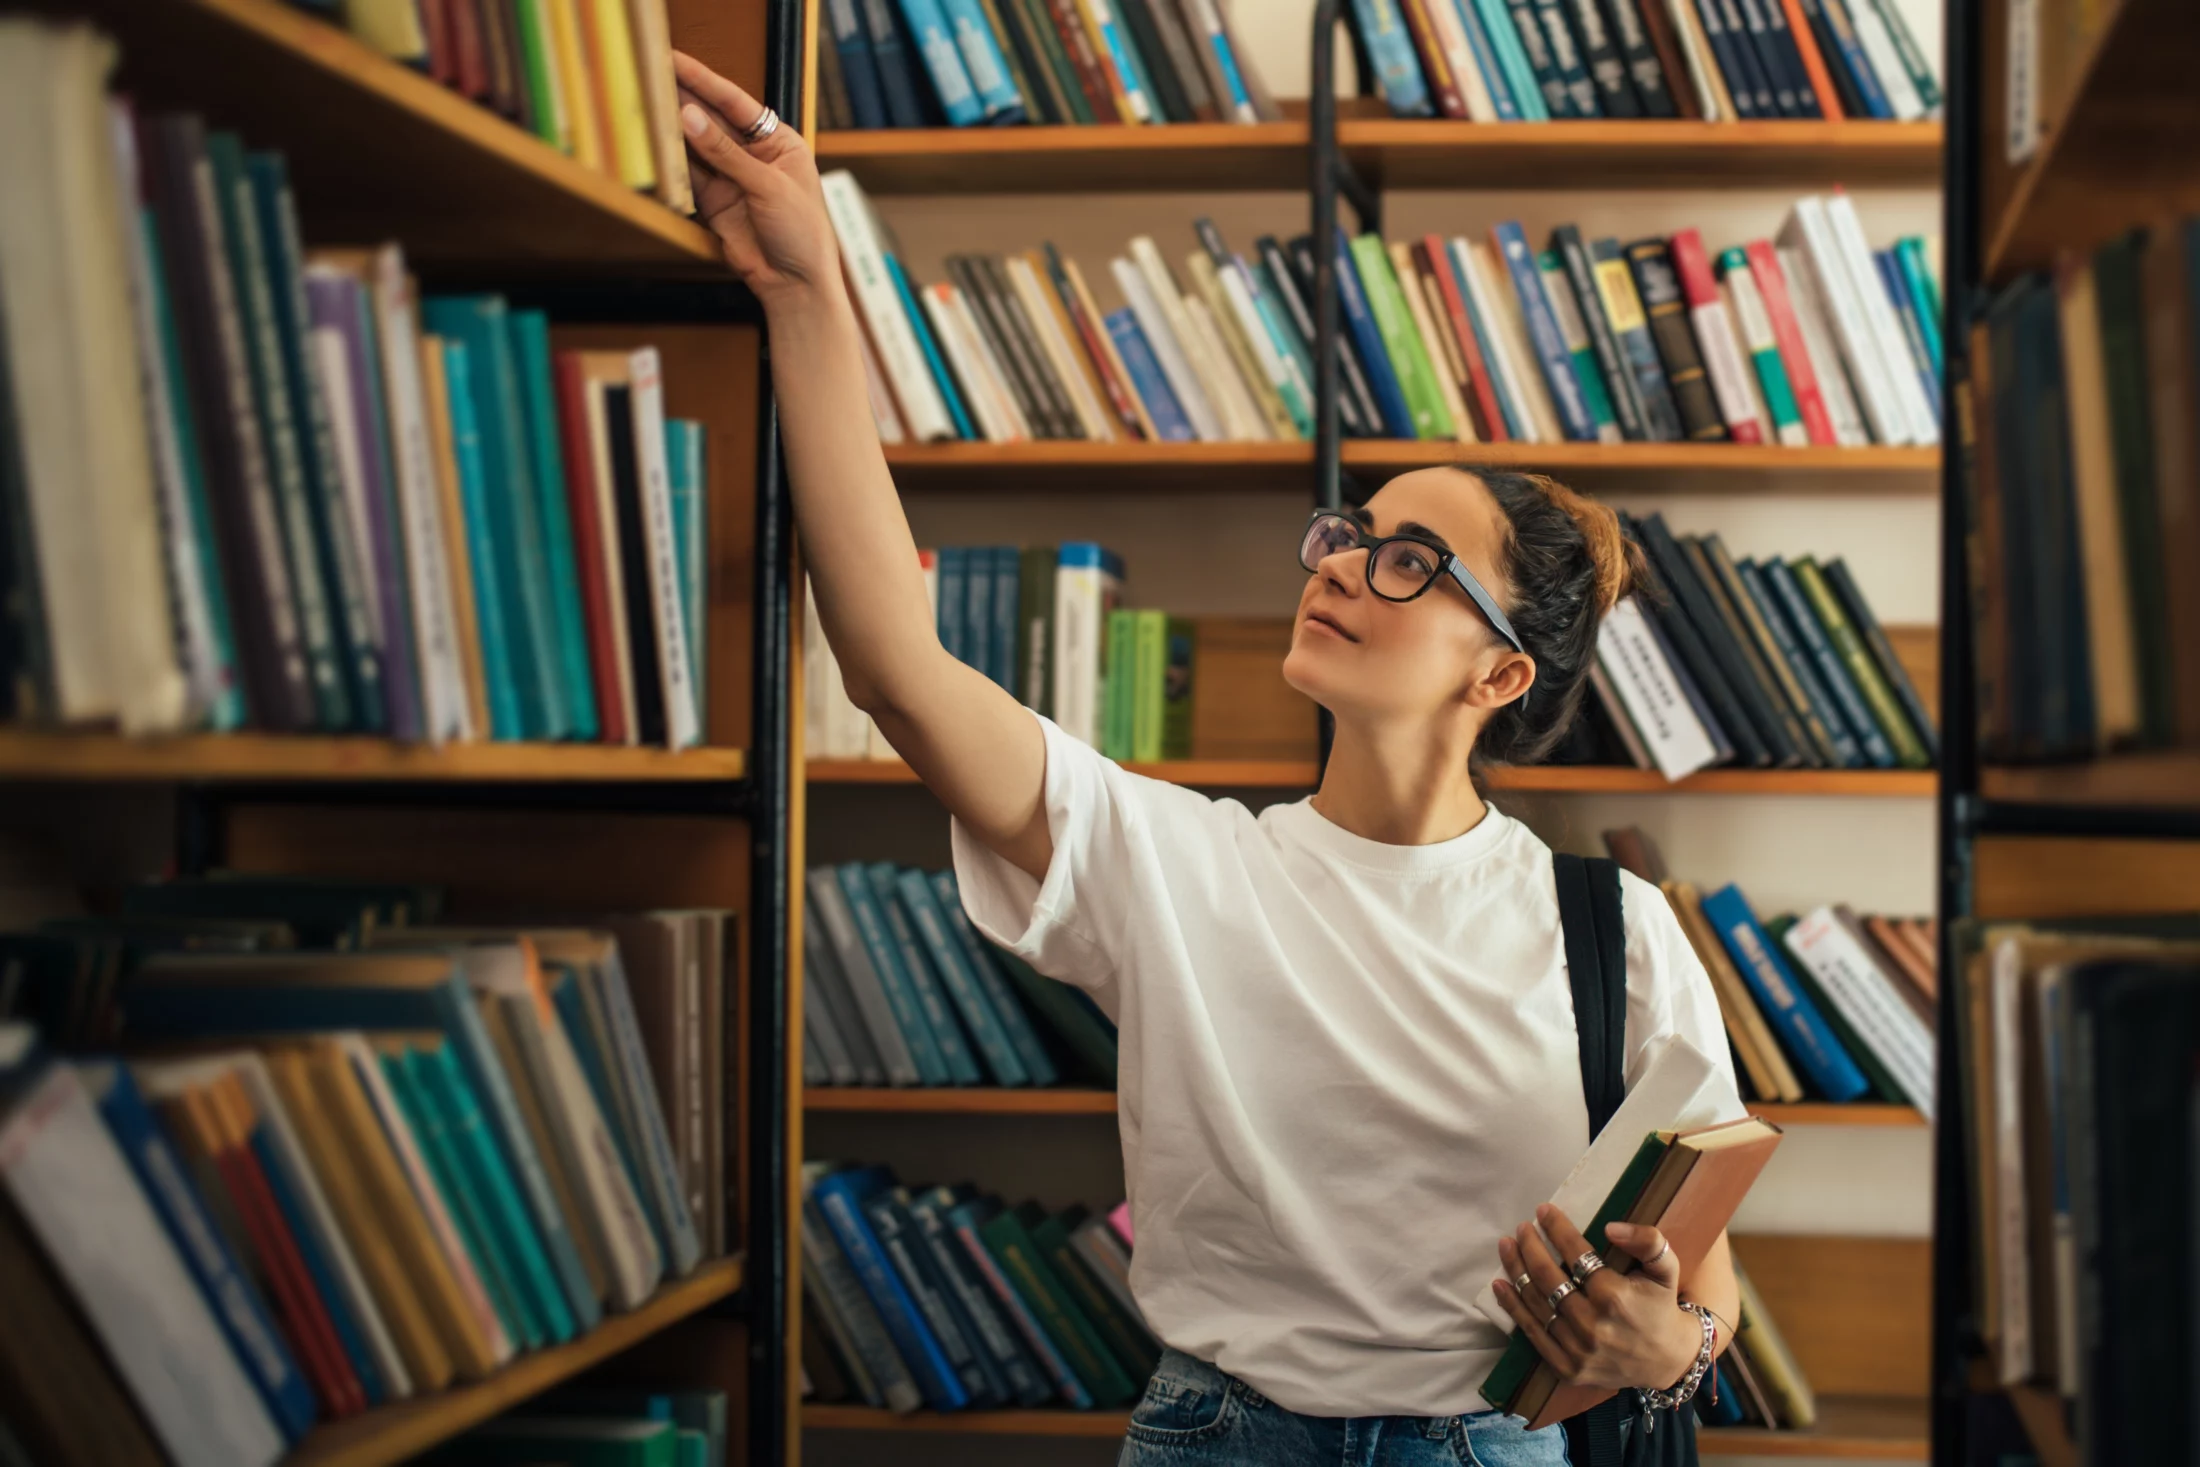 no spend weekend ideas: head to the library | Swoosh Finance